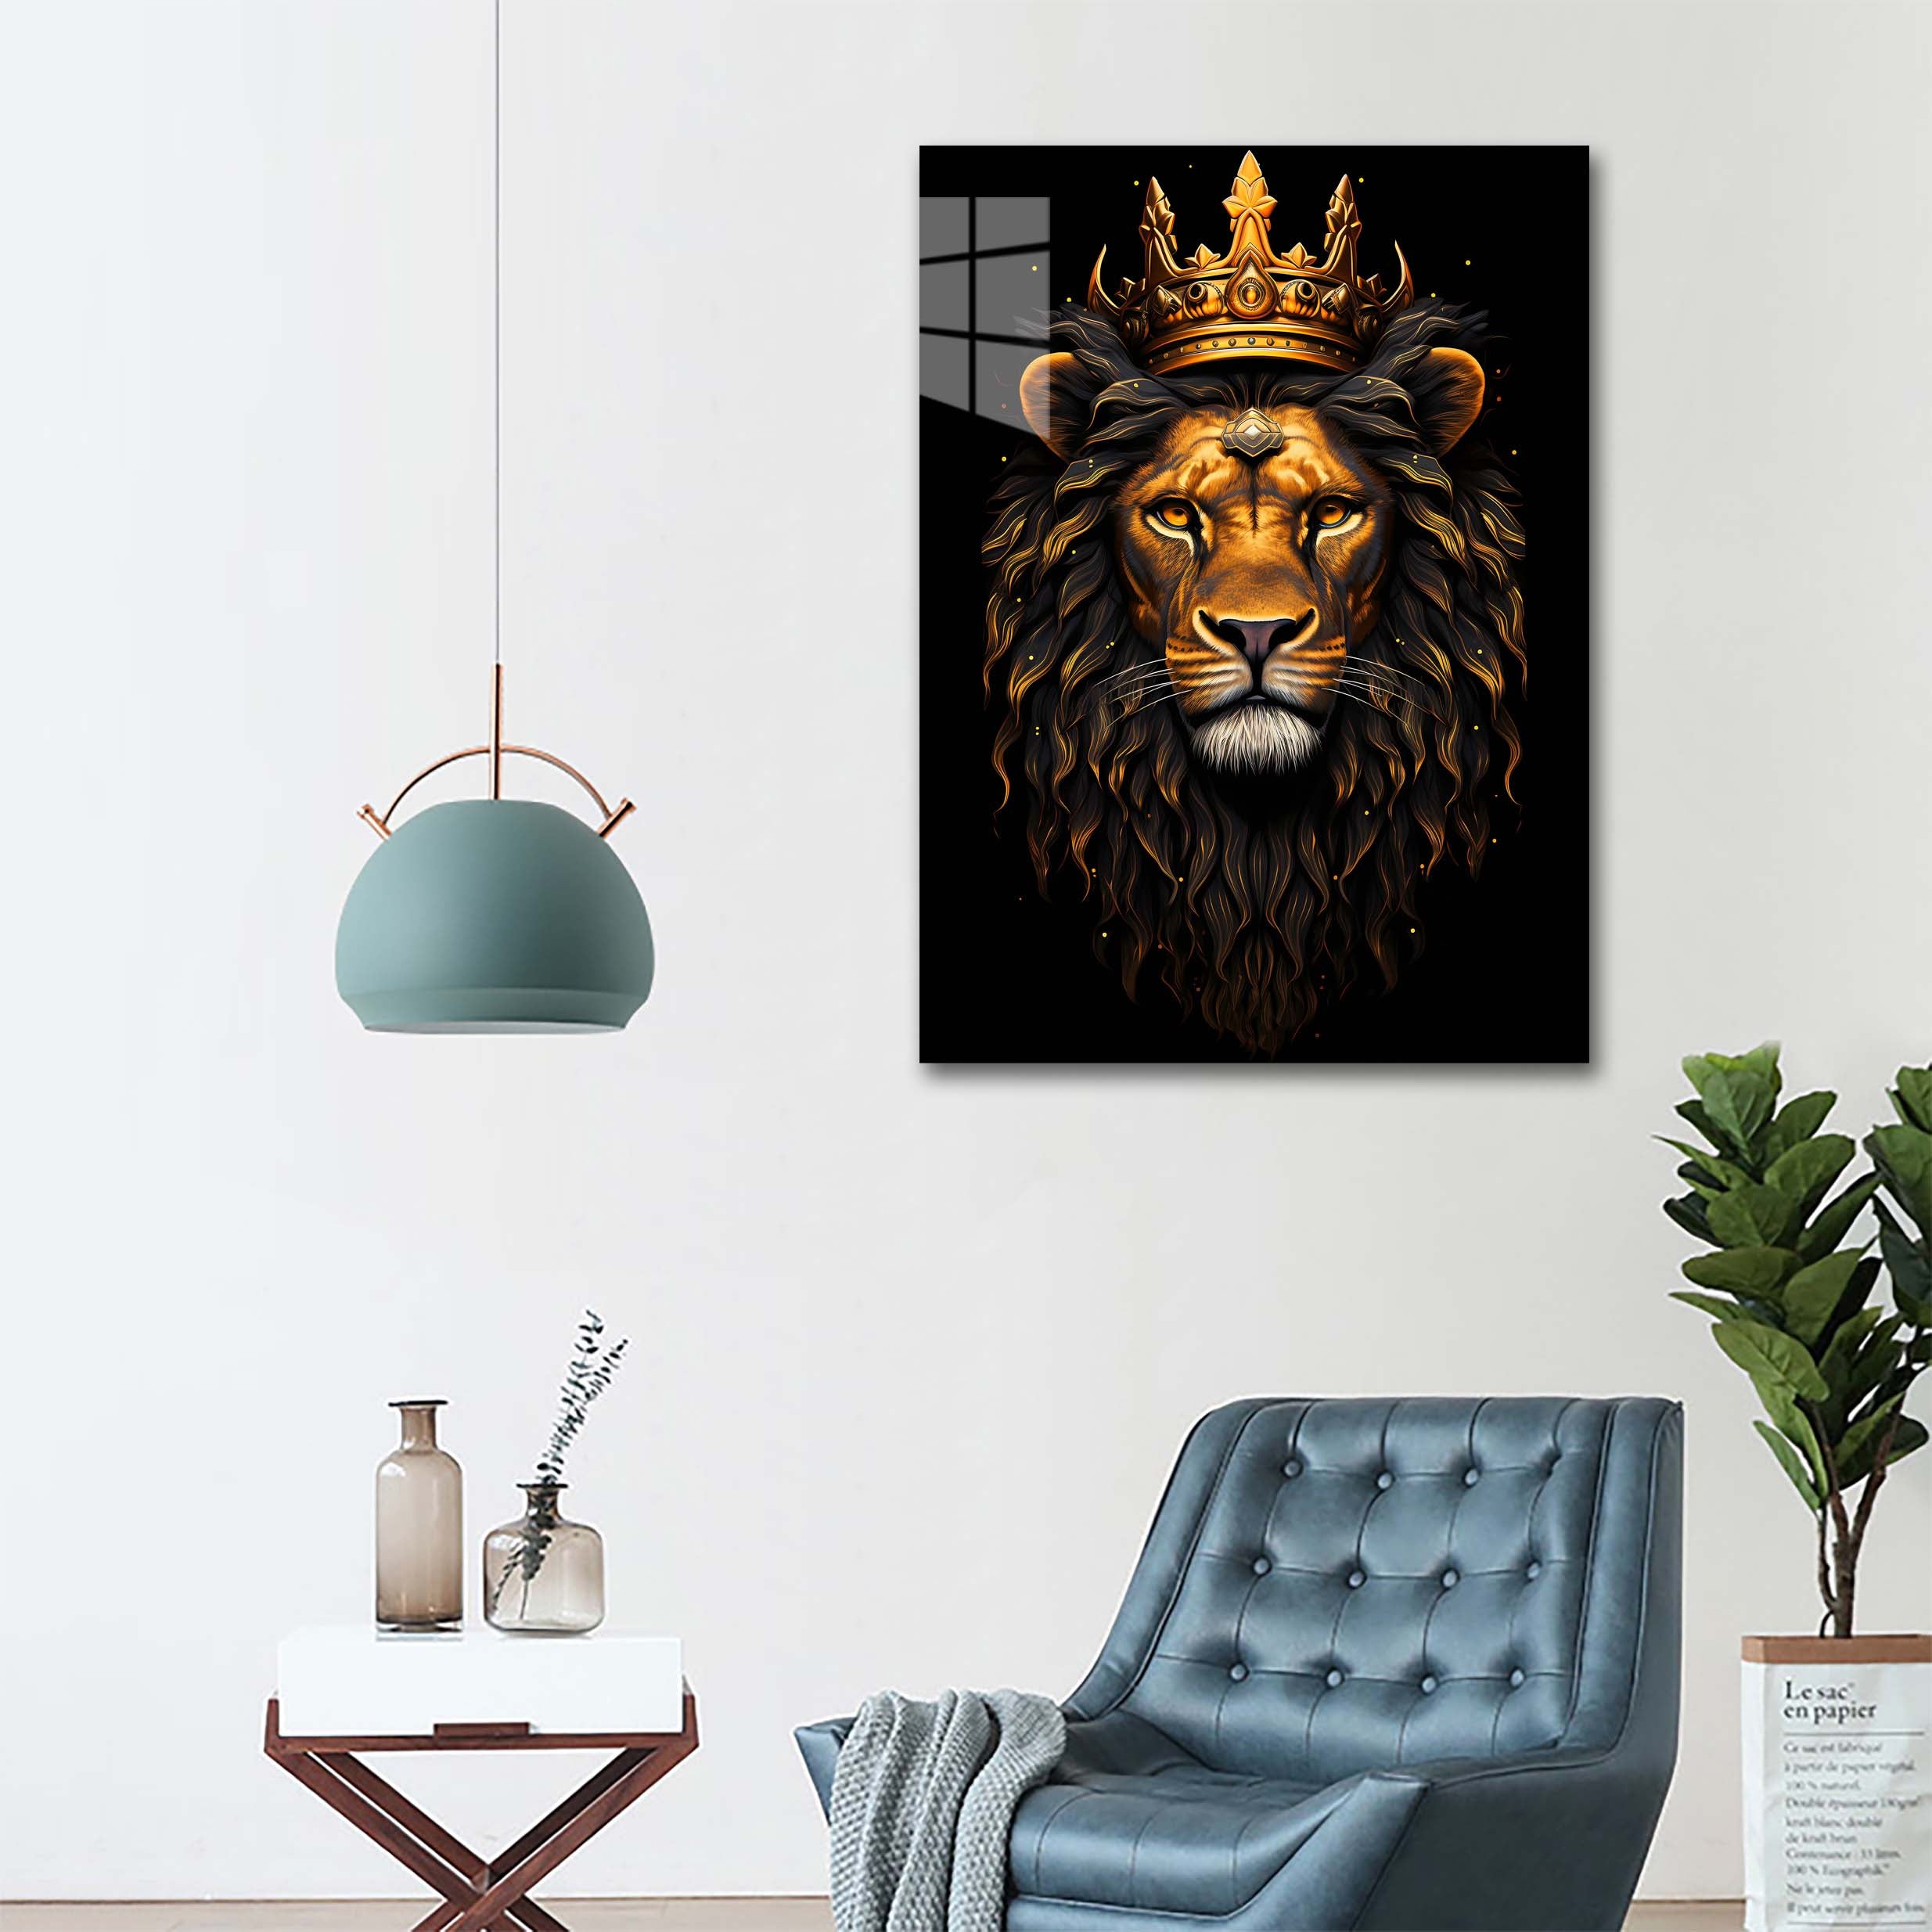 King Lion 1-designed by @Puffy Design